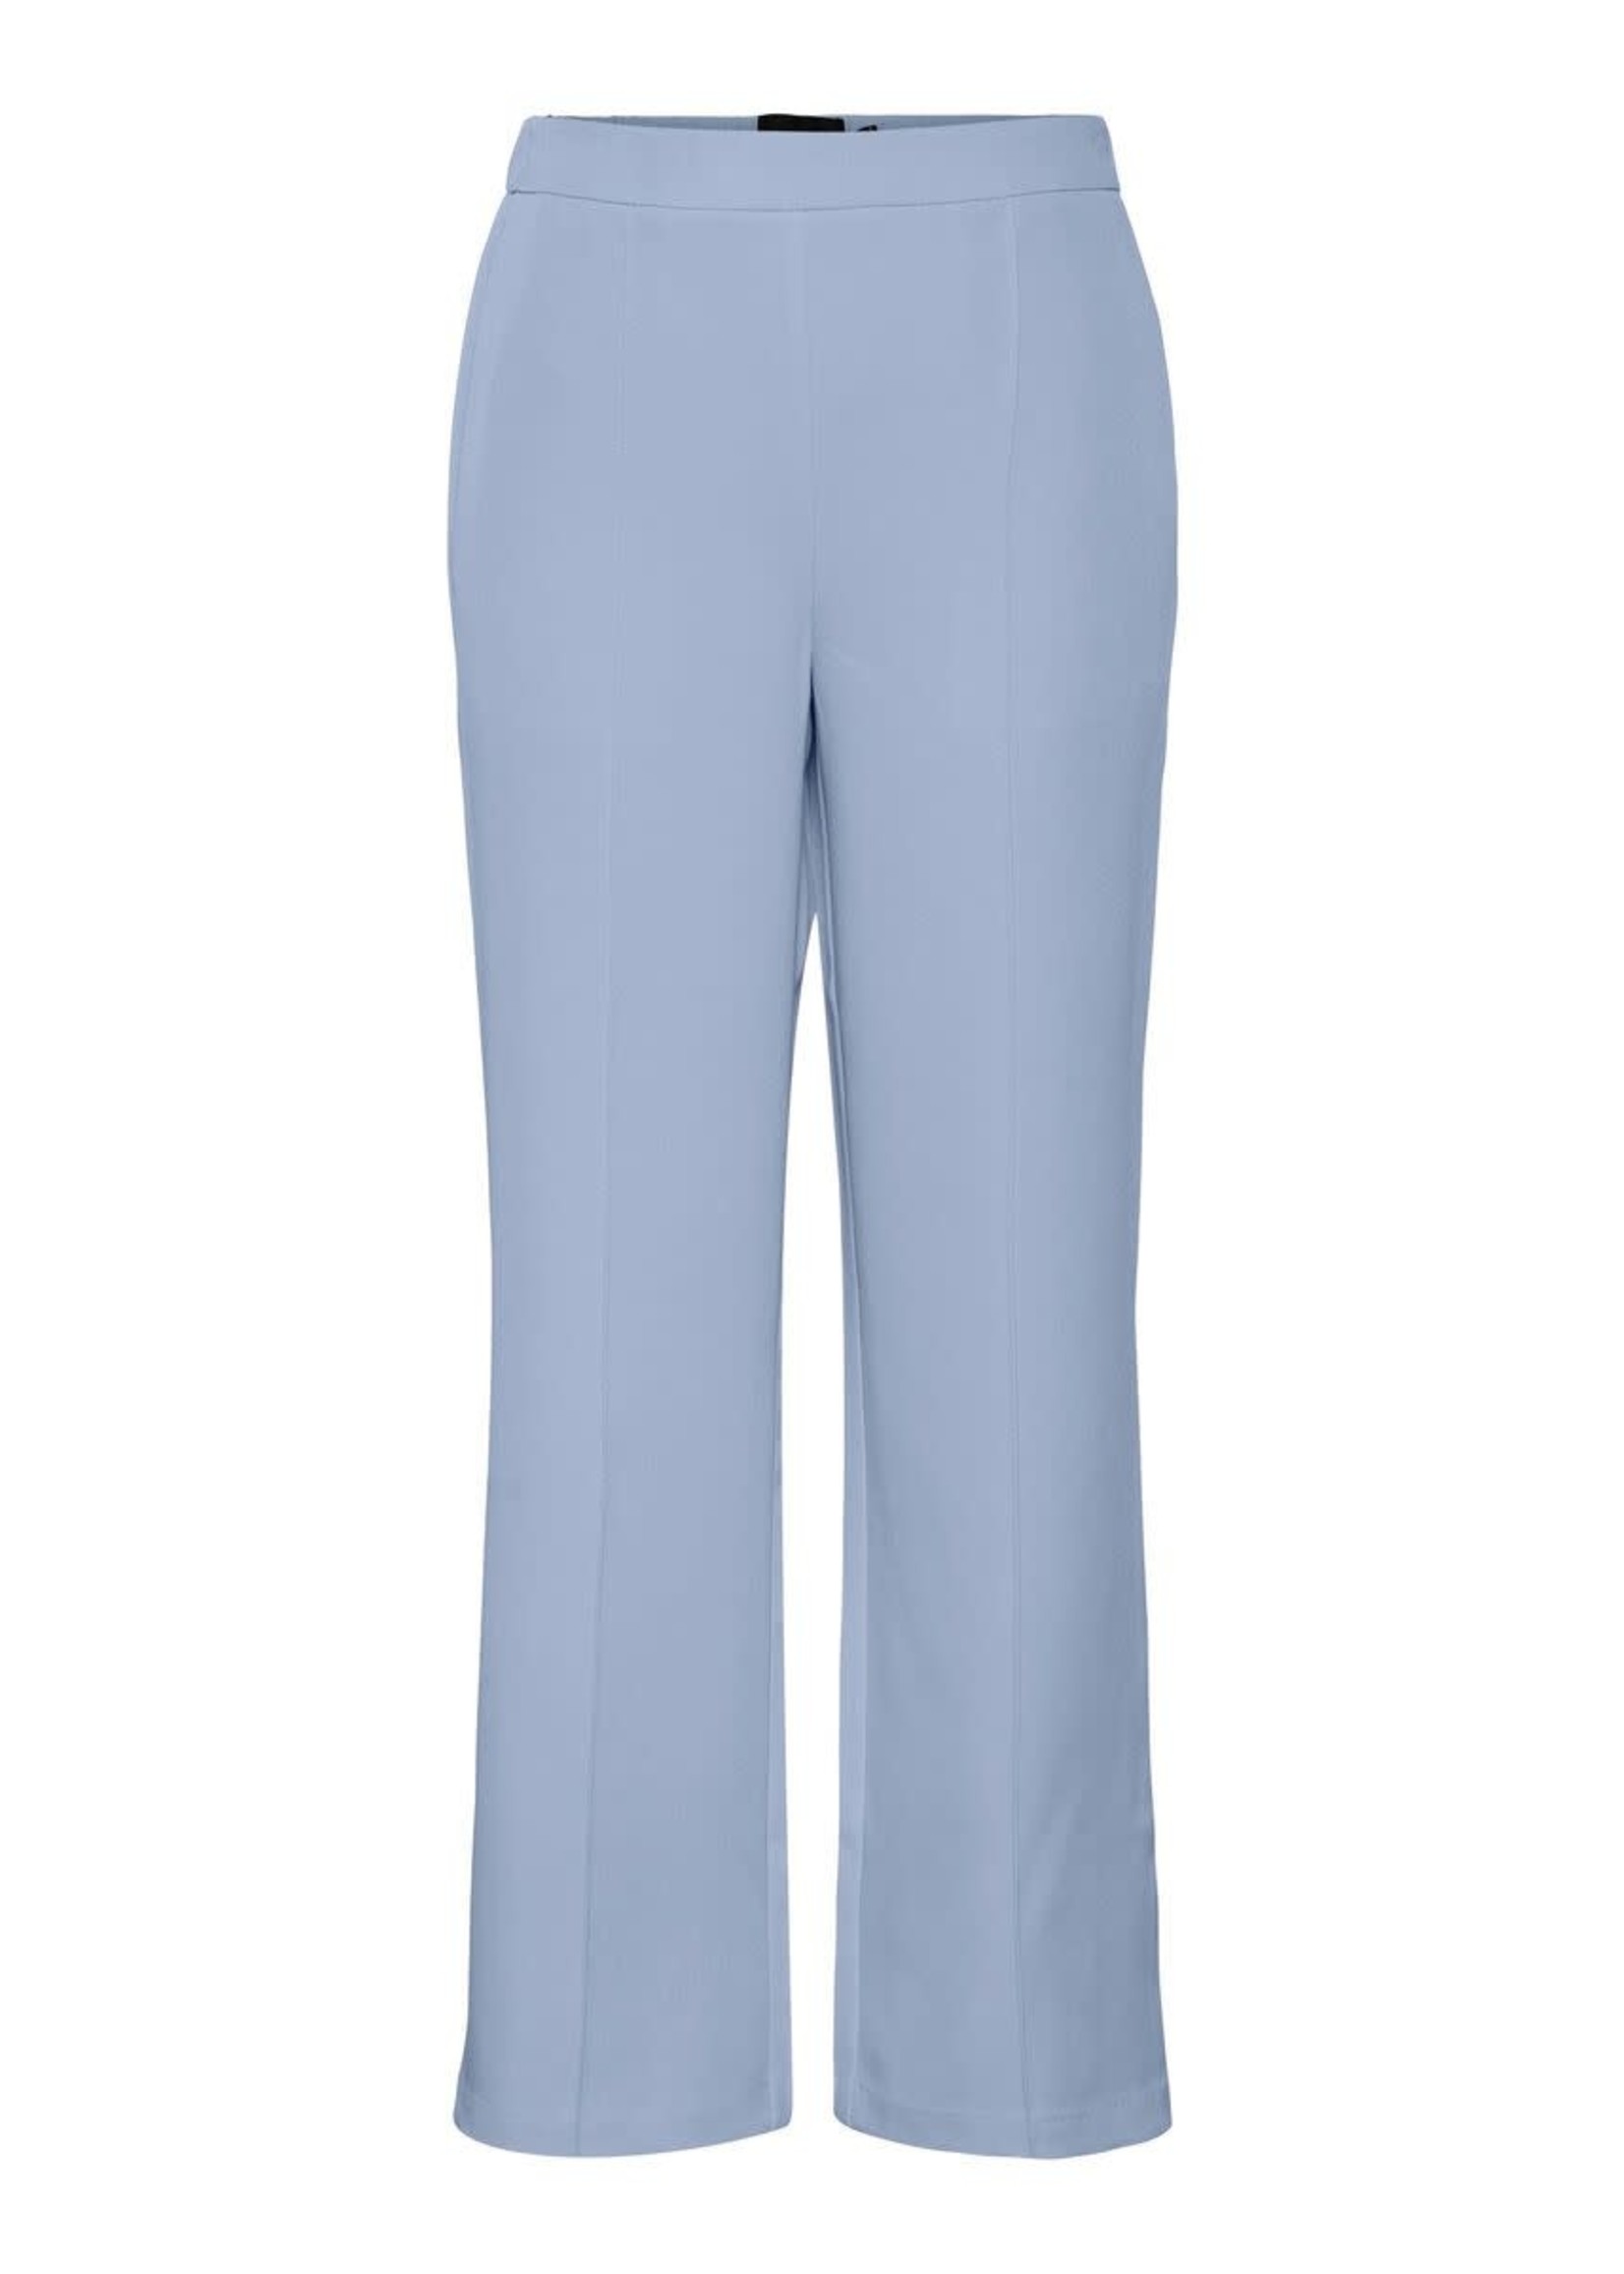 Pieces Pieces Bossy wide pants - Kentucky Blue